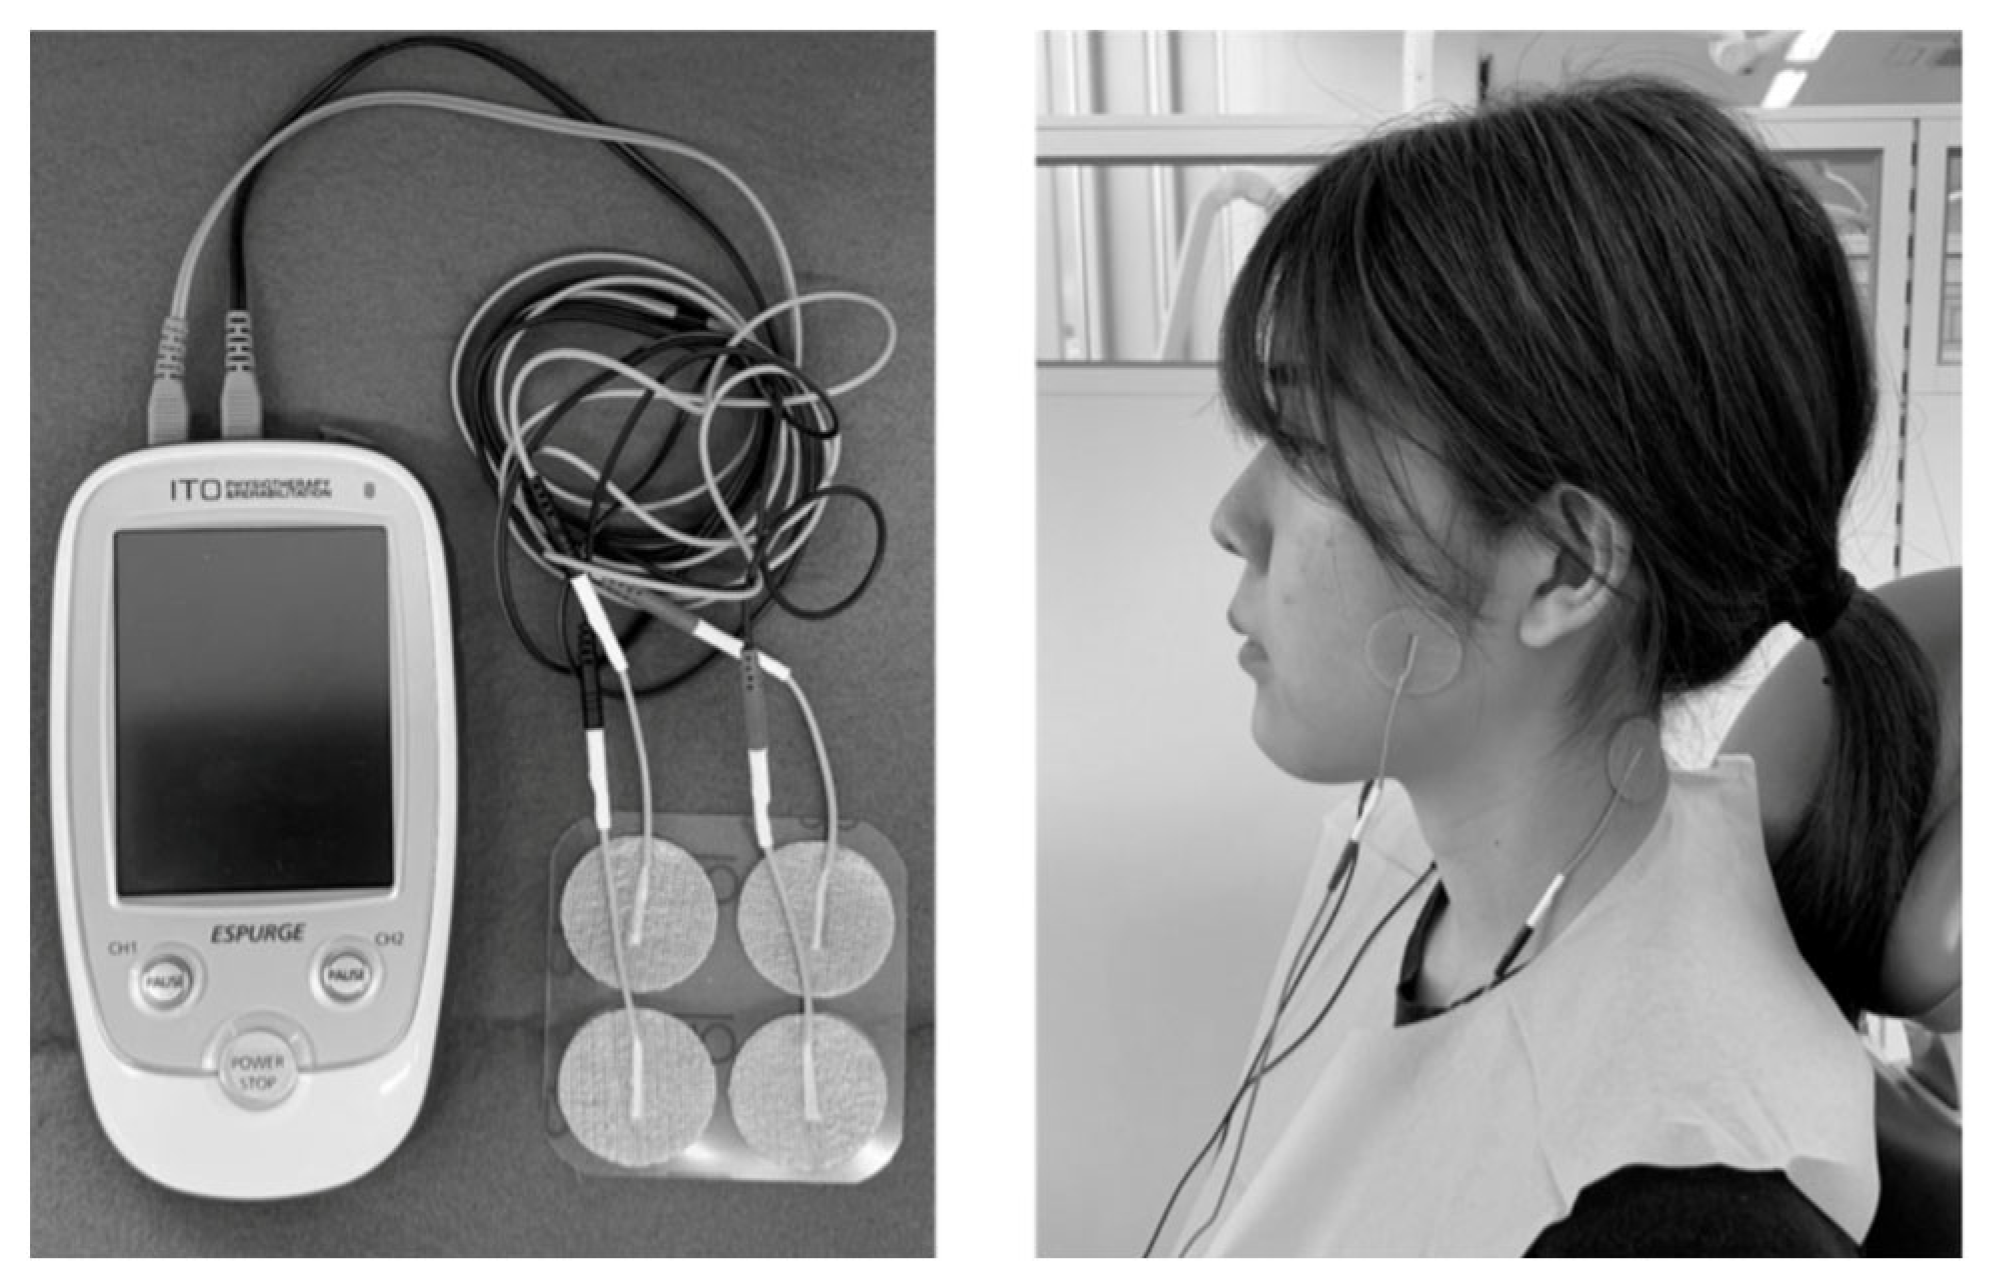 Digital TENS unit for Pain Relief - Drug Free Pain Relief Equipment - Fu  Kang Healthcare Shop Online